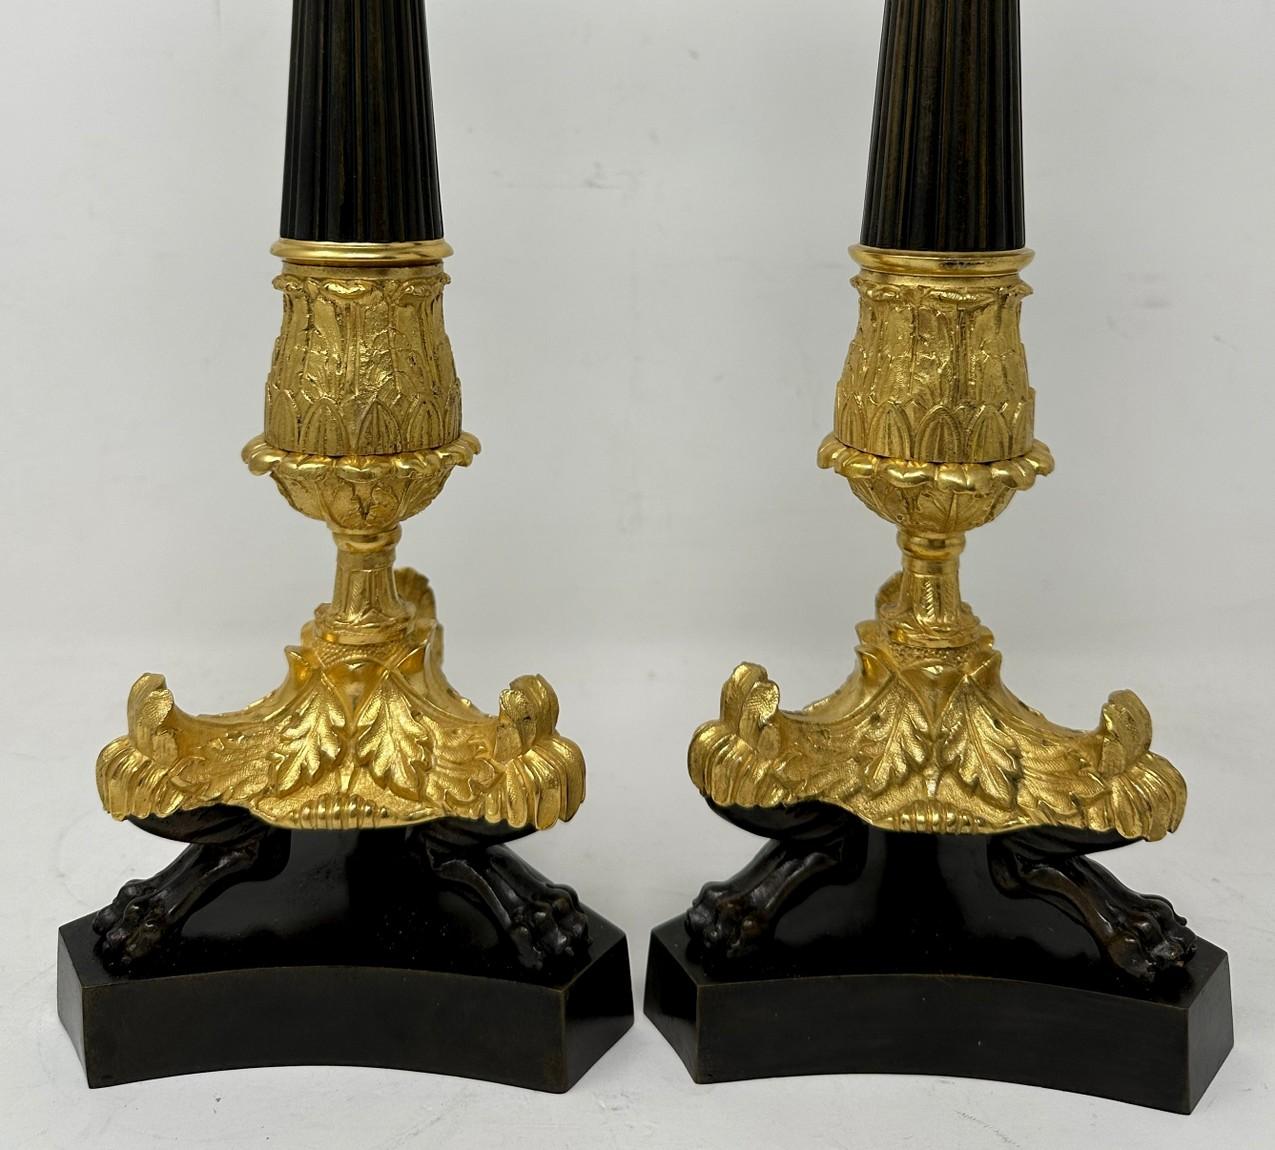 Antique Pair of French Doré Bronze Neoclassical Ormolu Gilt Candlesticks Lamps  For Sale 5